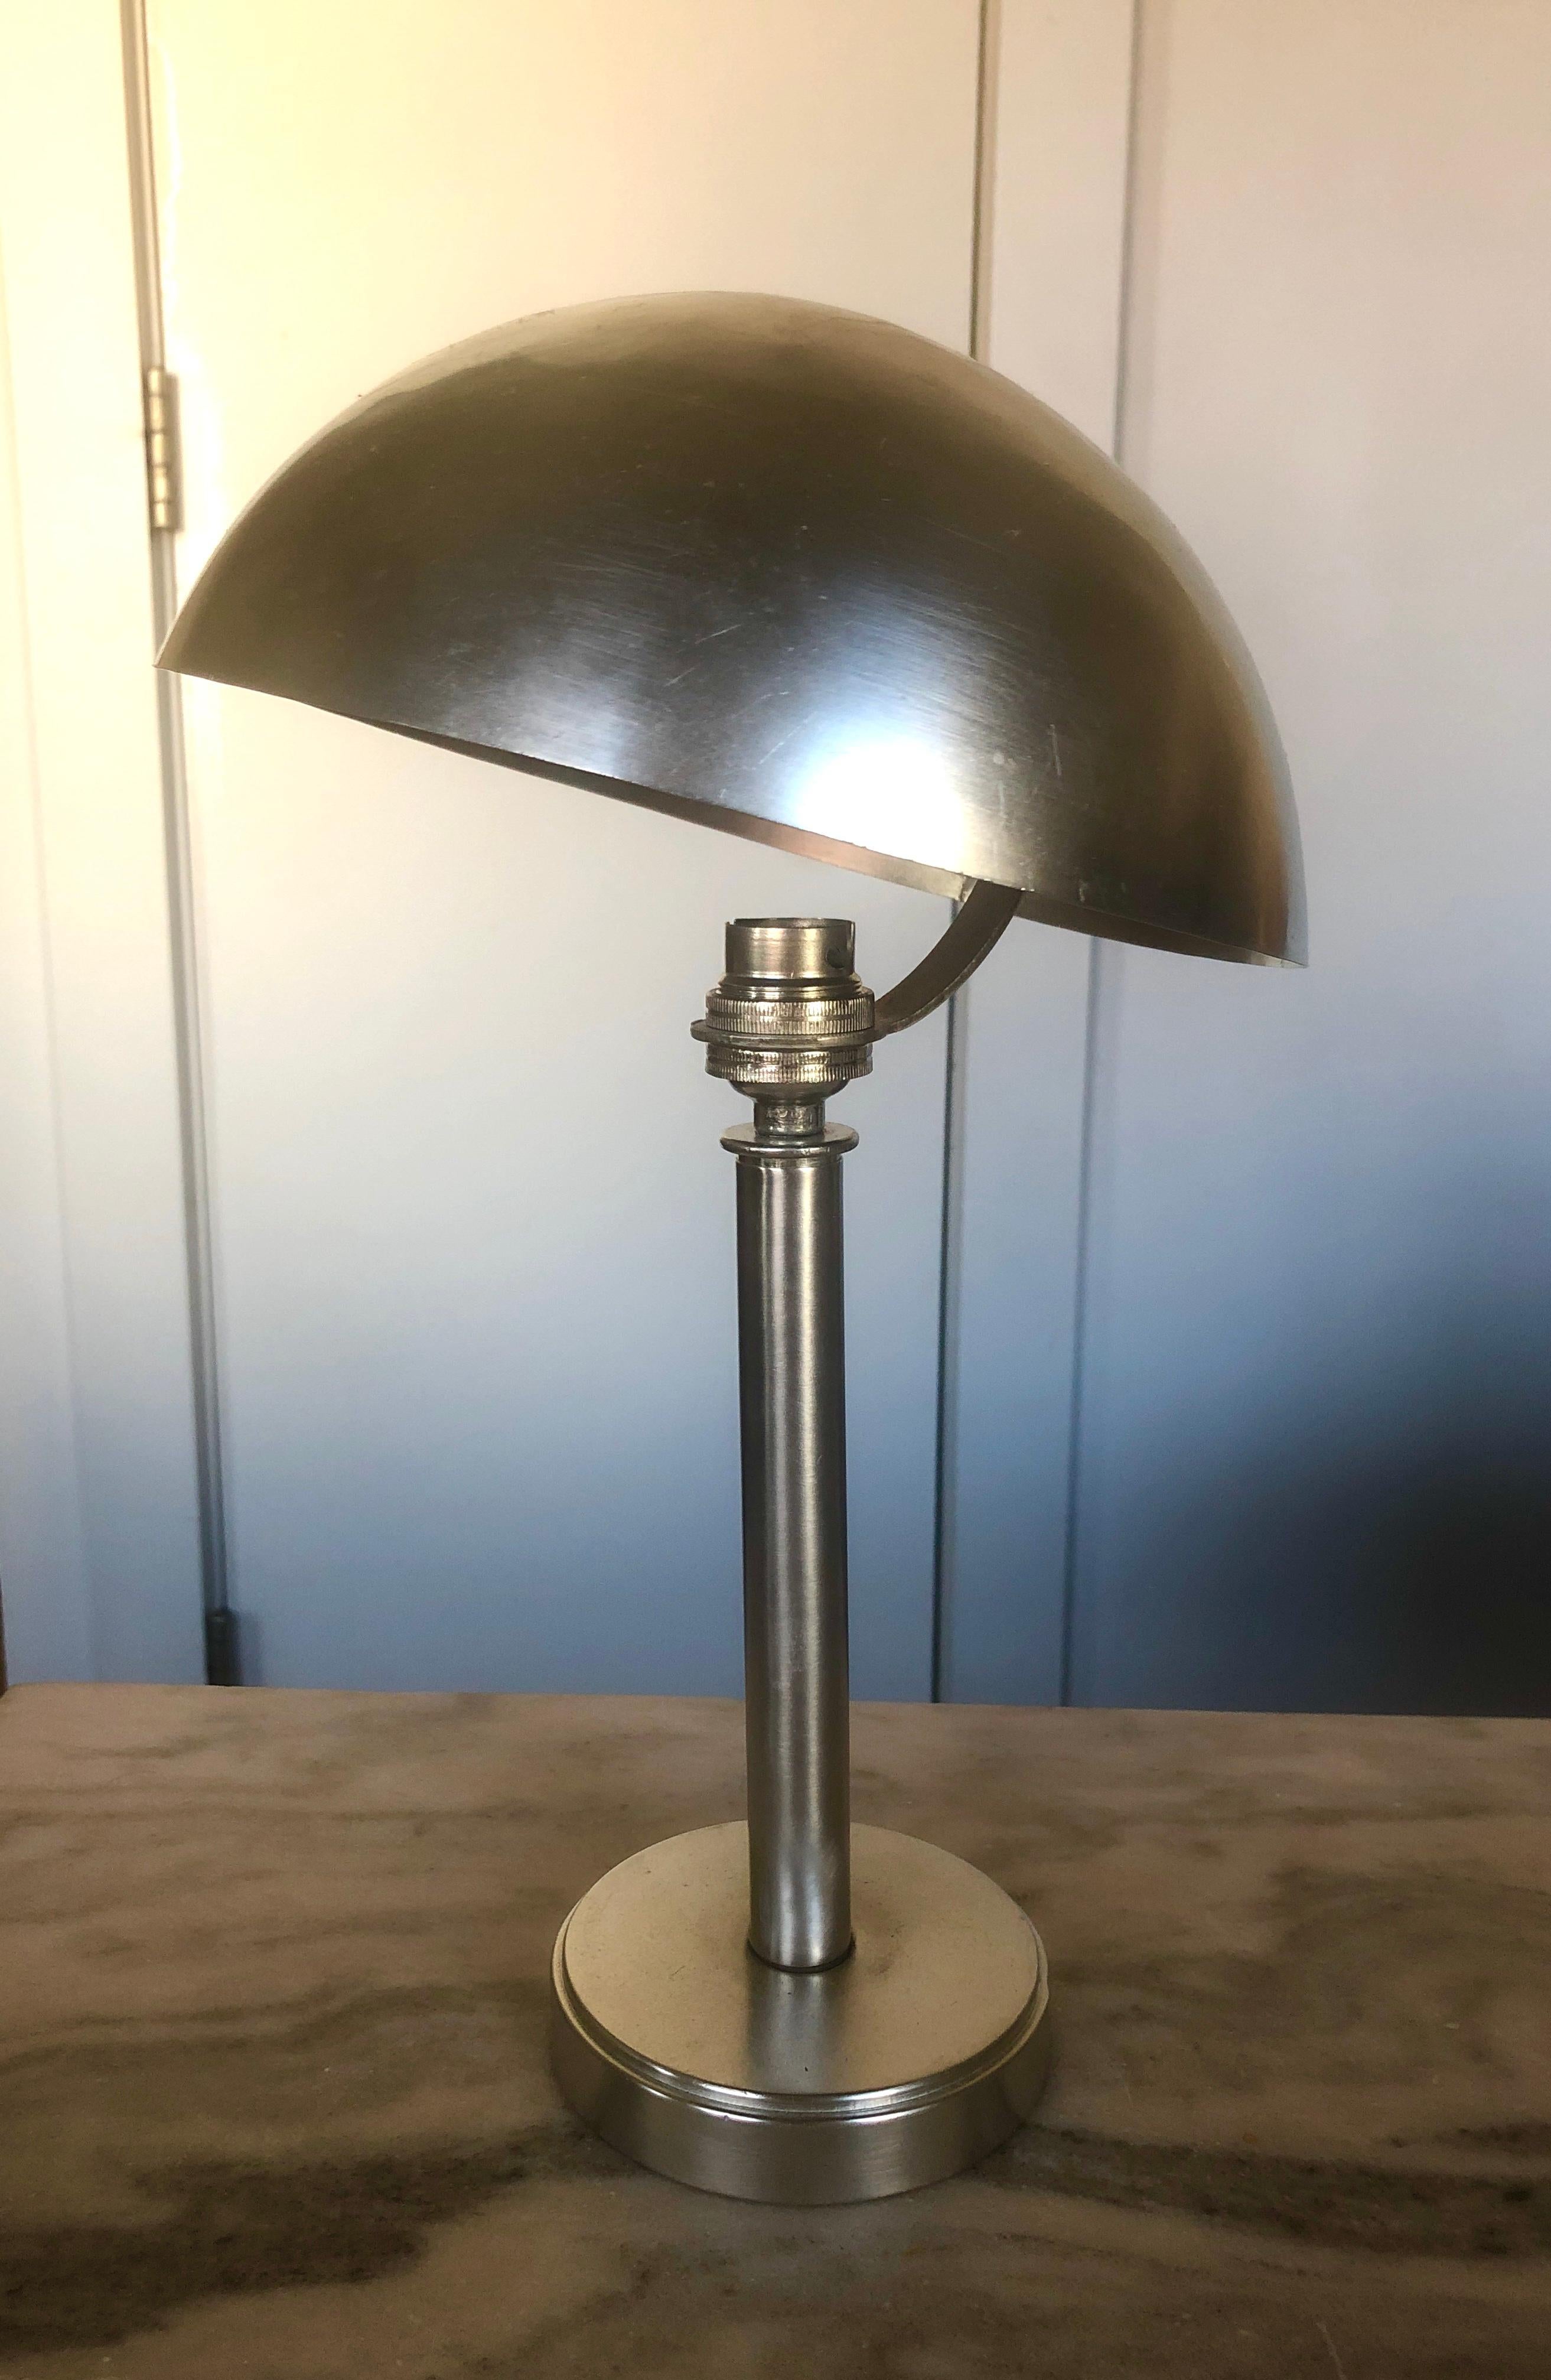 France, brushed nickeled surface over bronze with adjustable dome shade, circa 1930. Retains European socket.